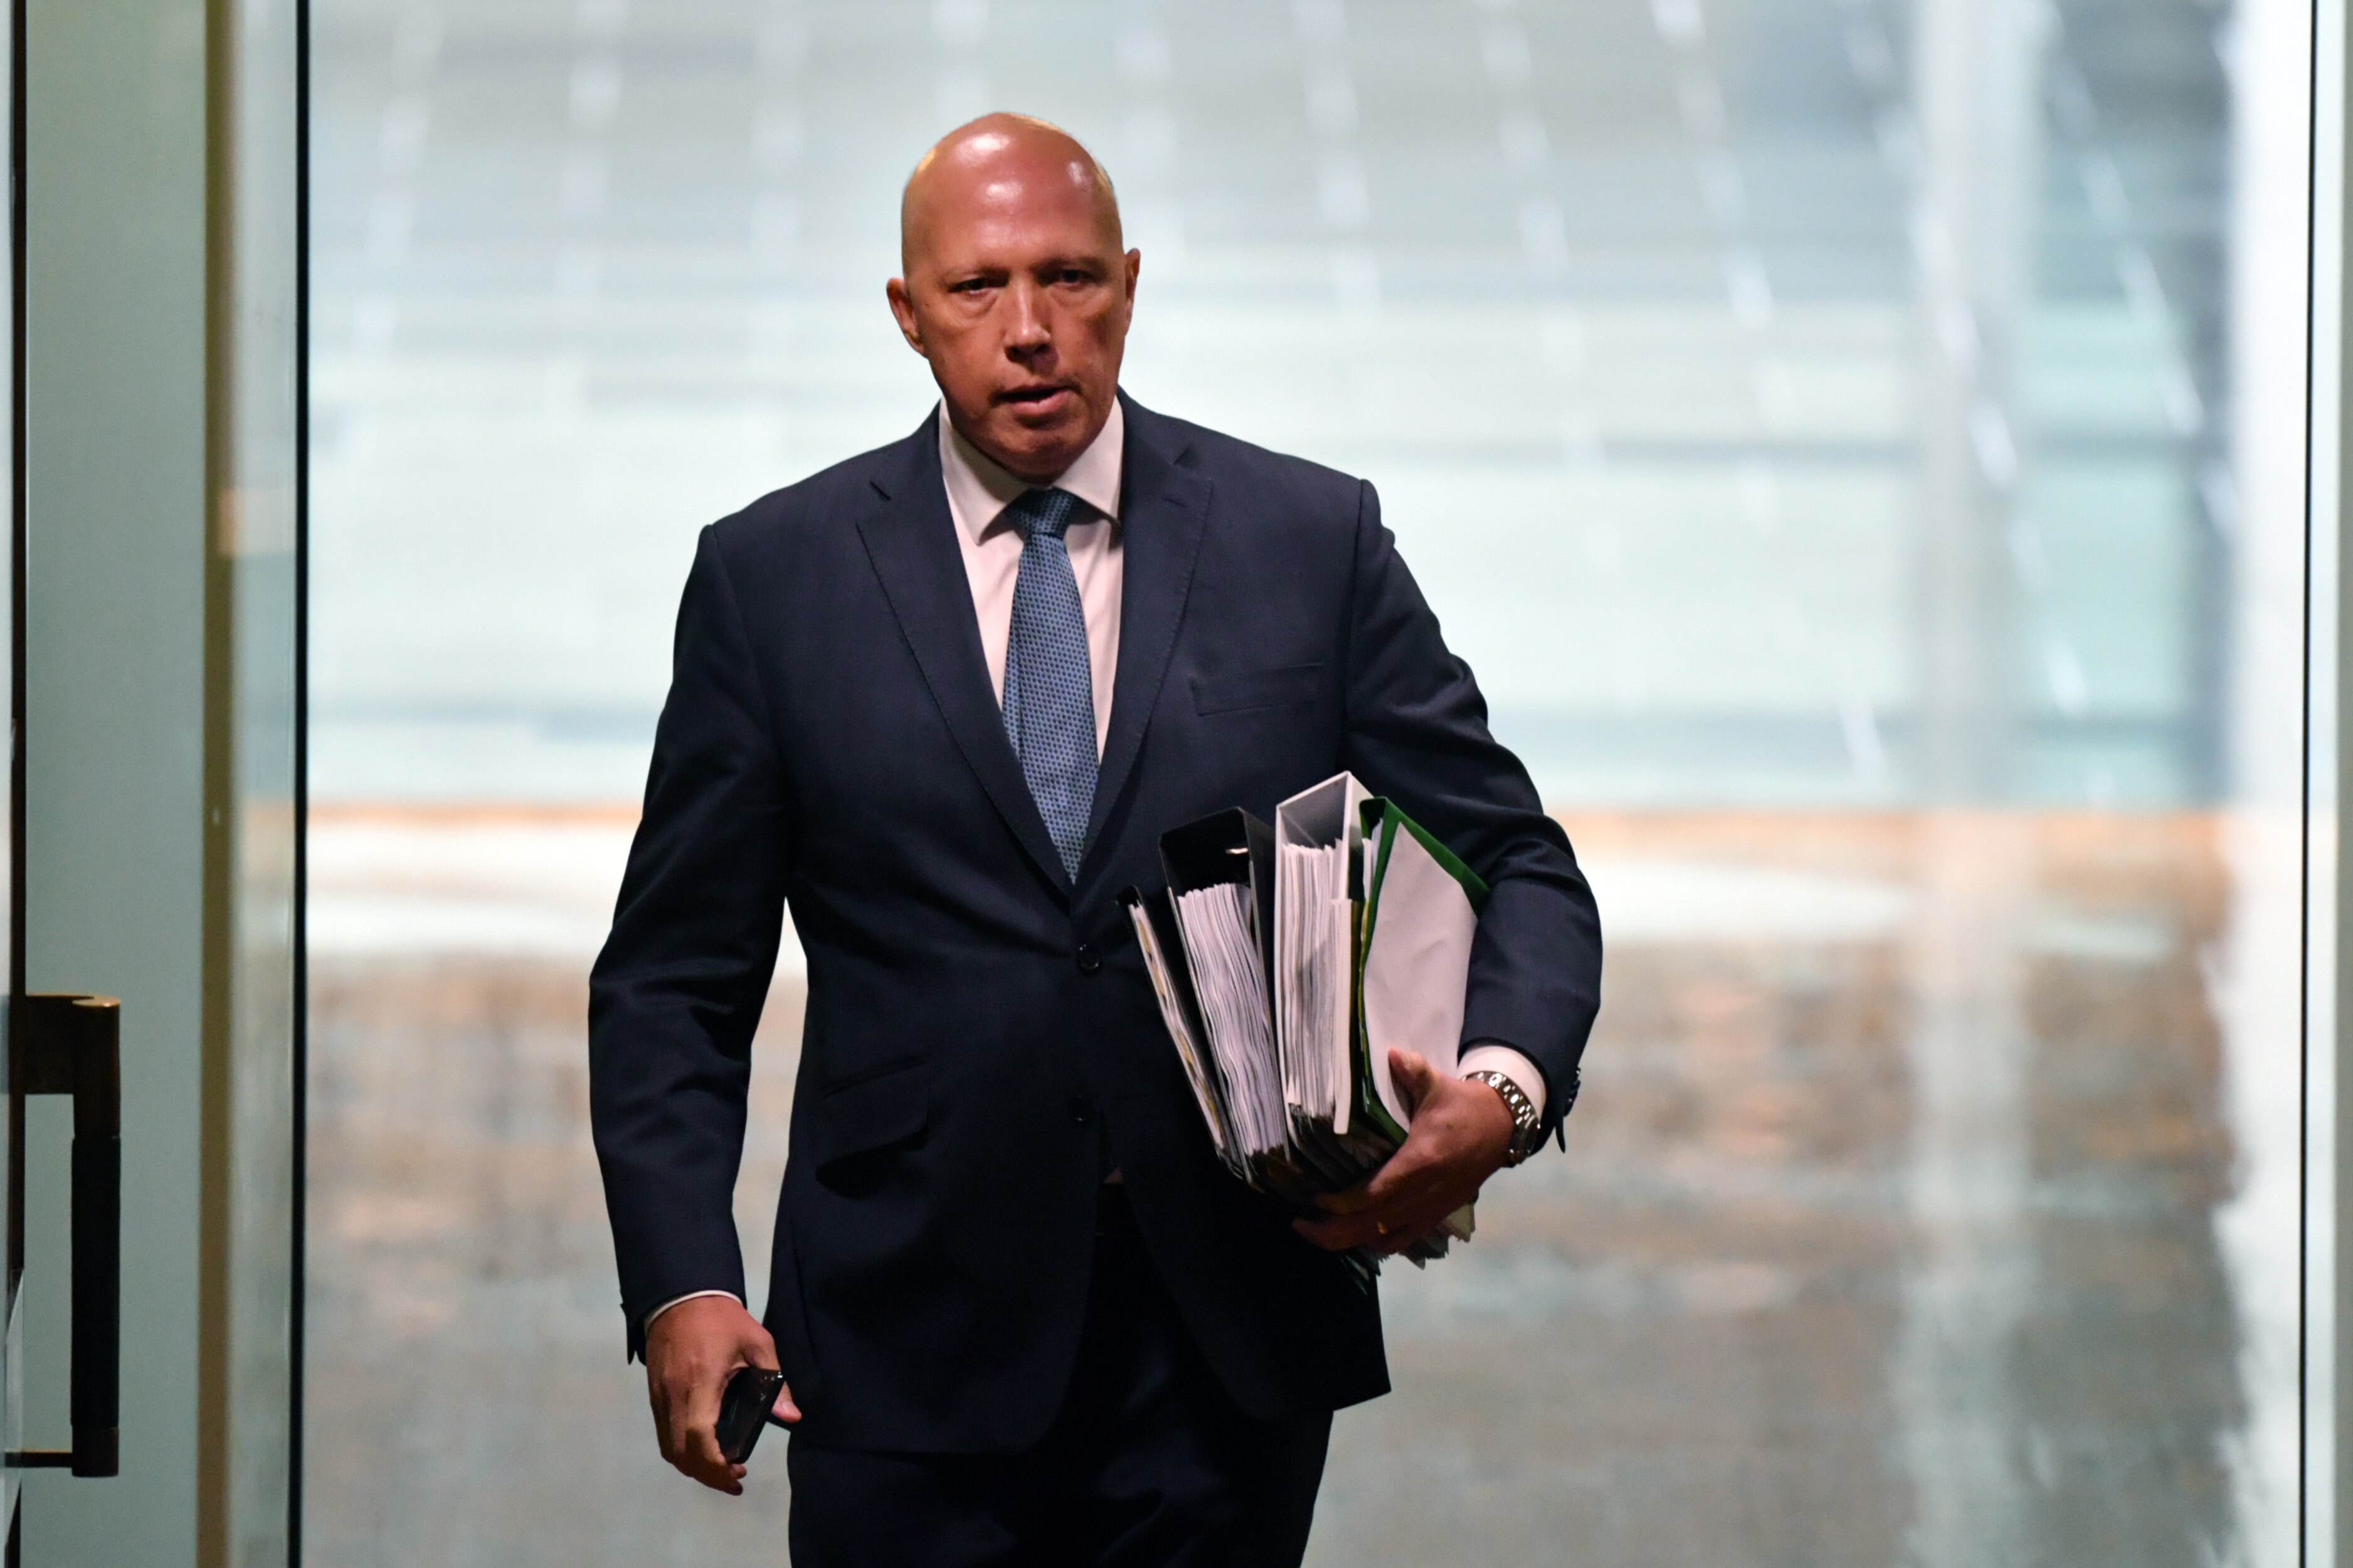 Minister for Home Affairs Peter Dutton arrives for Question Time in the House of Representatives at Parliament House in Canberra, Wednesday, March 17, 2021. (AAP Image/Mick Tsikas) NO ARCHIVING